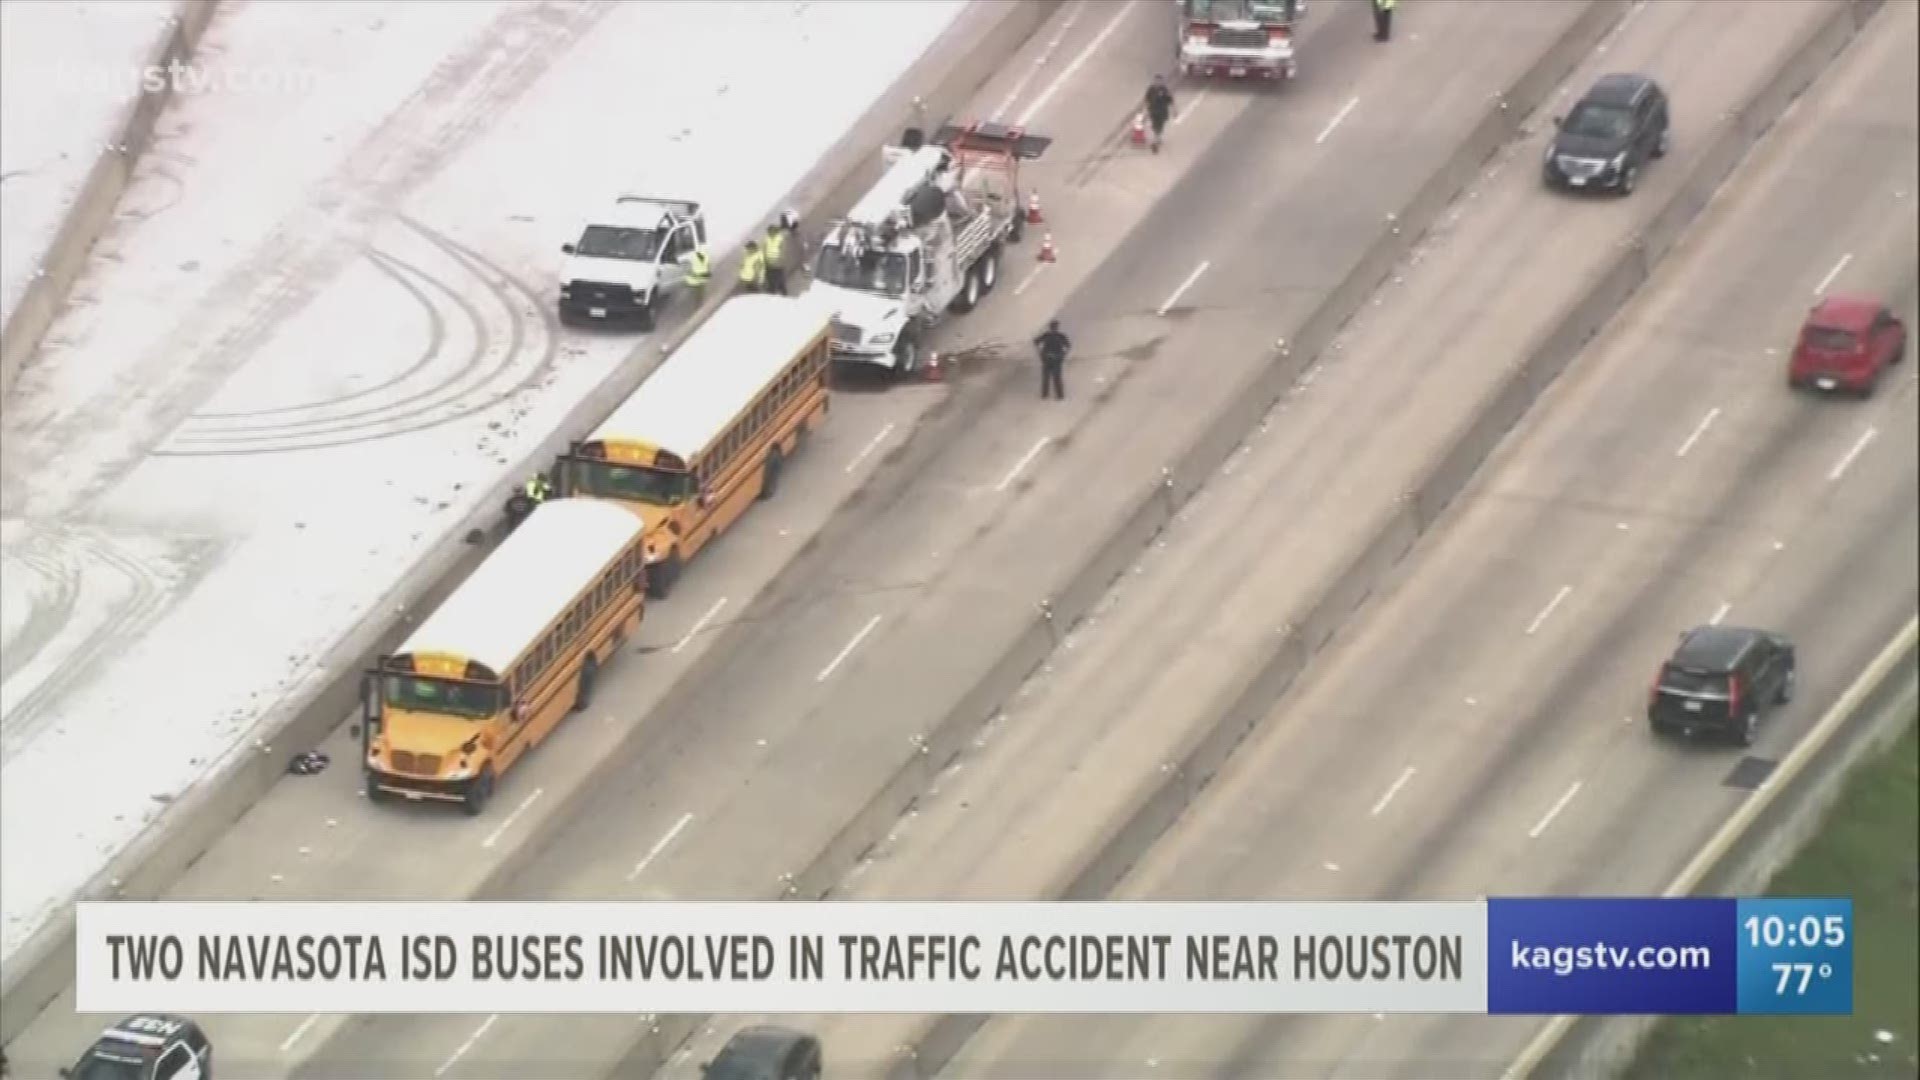 Thirty people were injured, including some students, when two Navasota ISD buses were involved in a traffic accident in the Houston area today. Here is Kacey Bowen with more details.